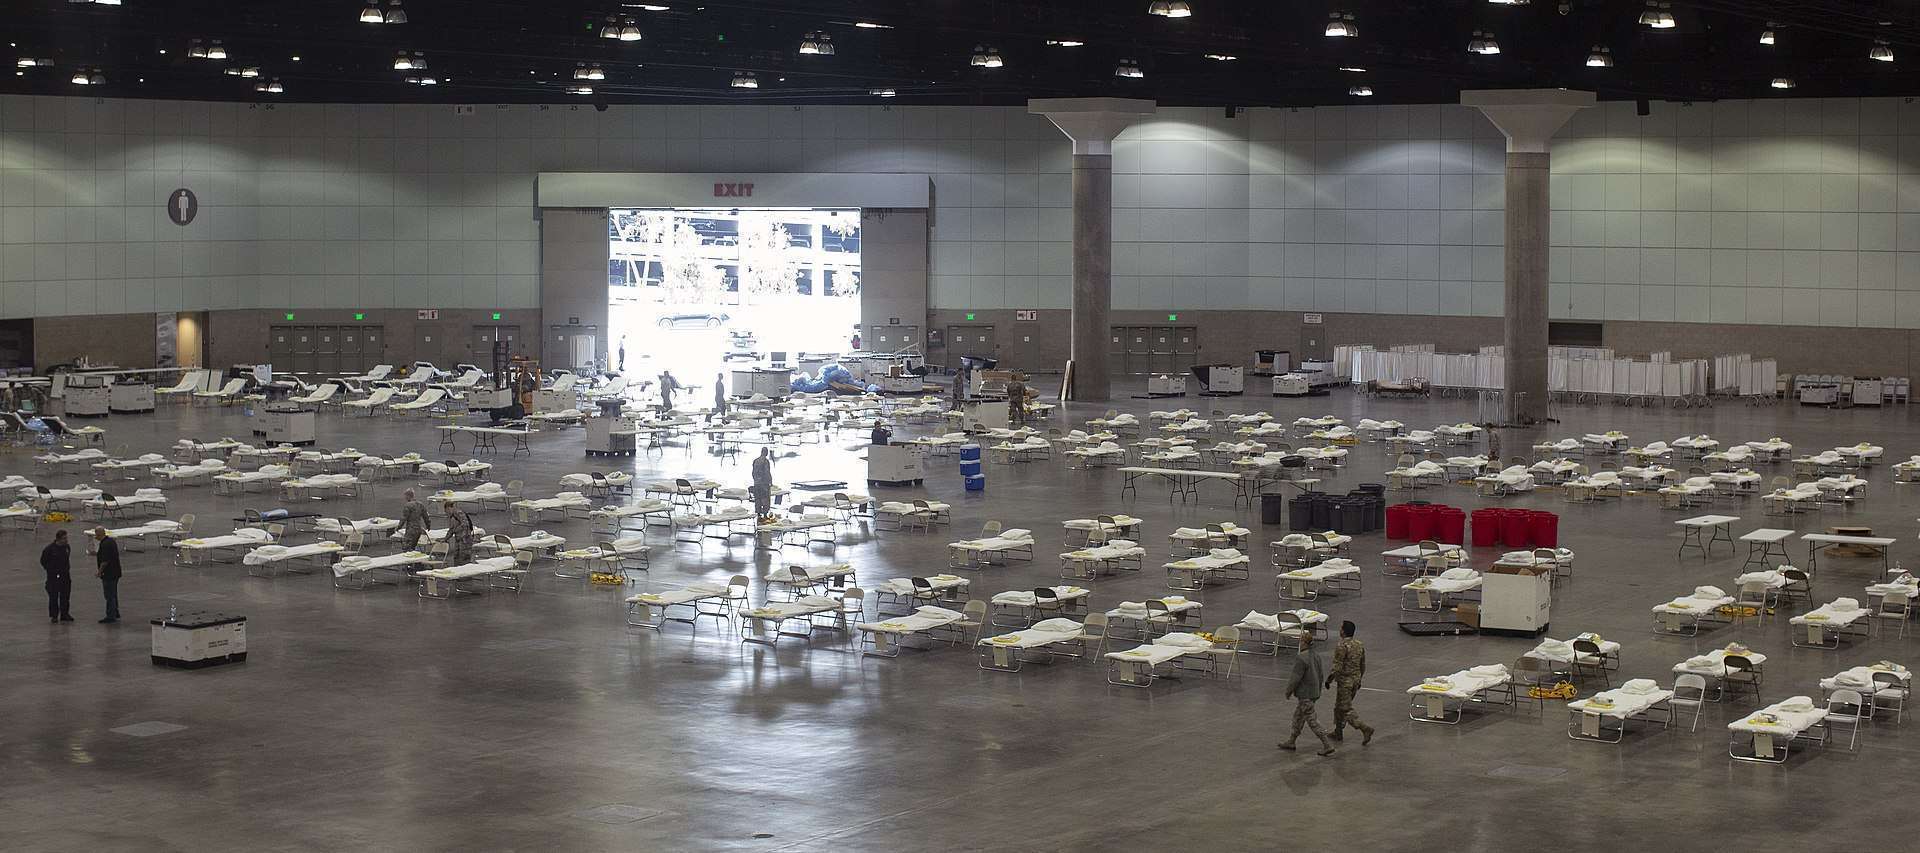 The Los Angeles Convention Center converted into a COVID-19 field hospital (March 2020)